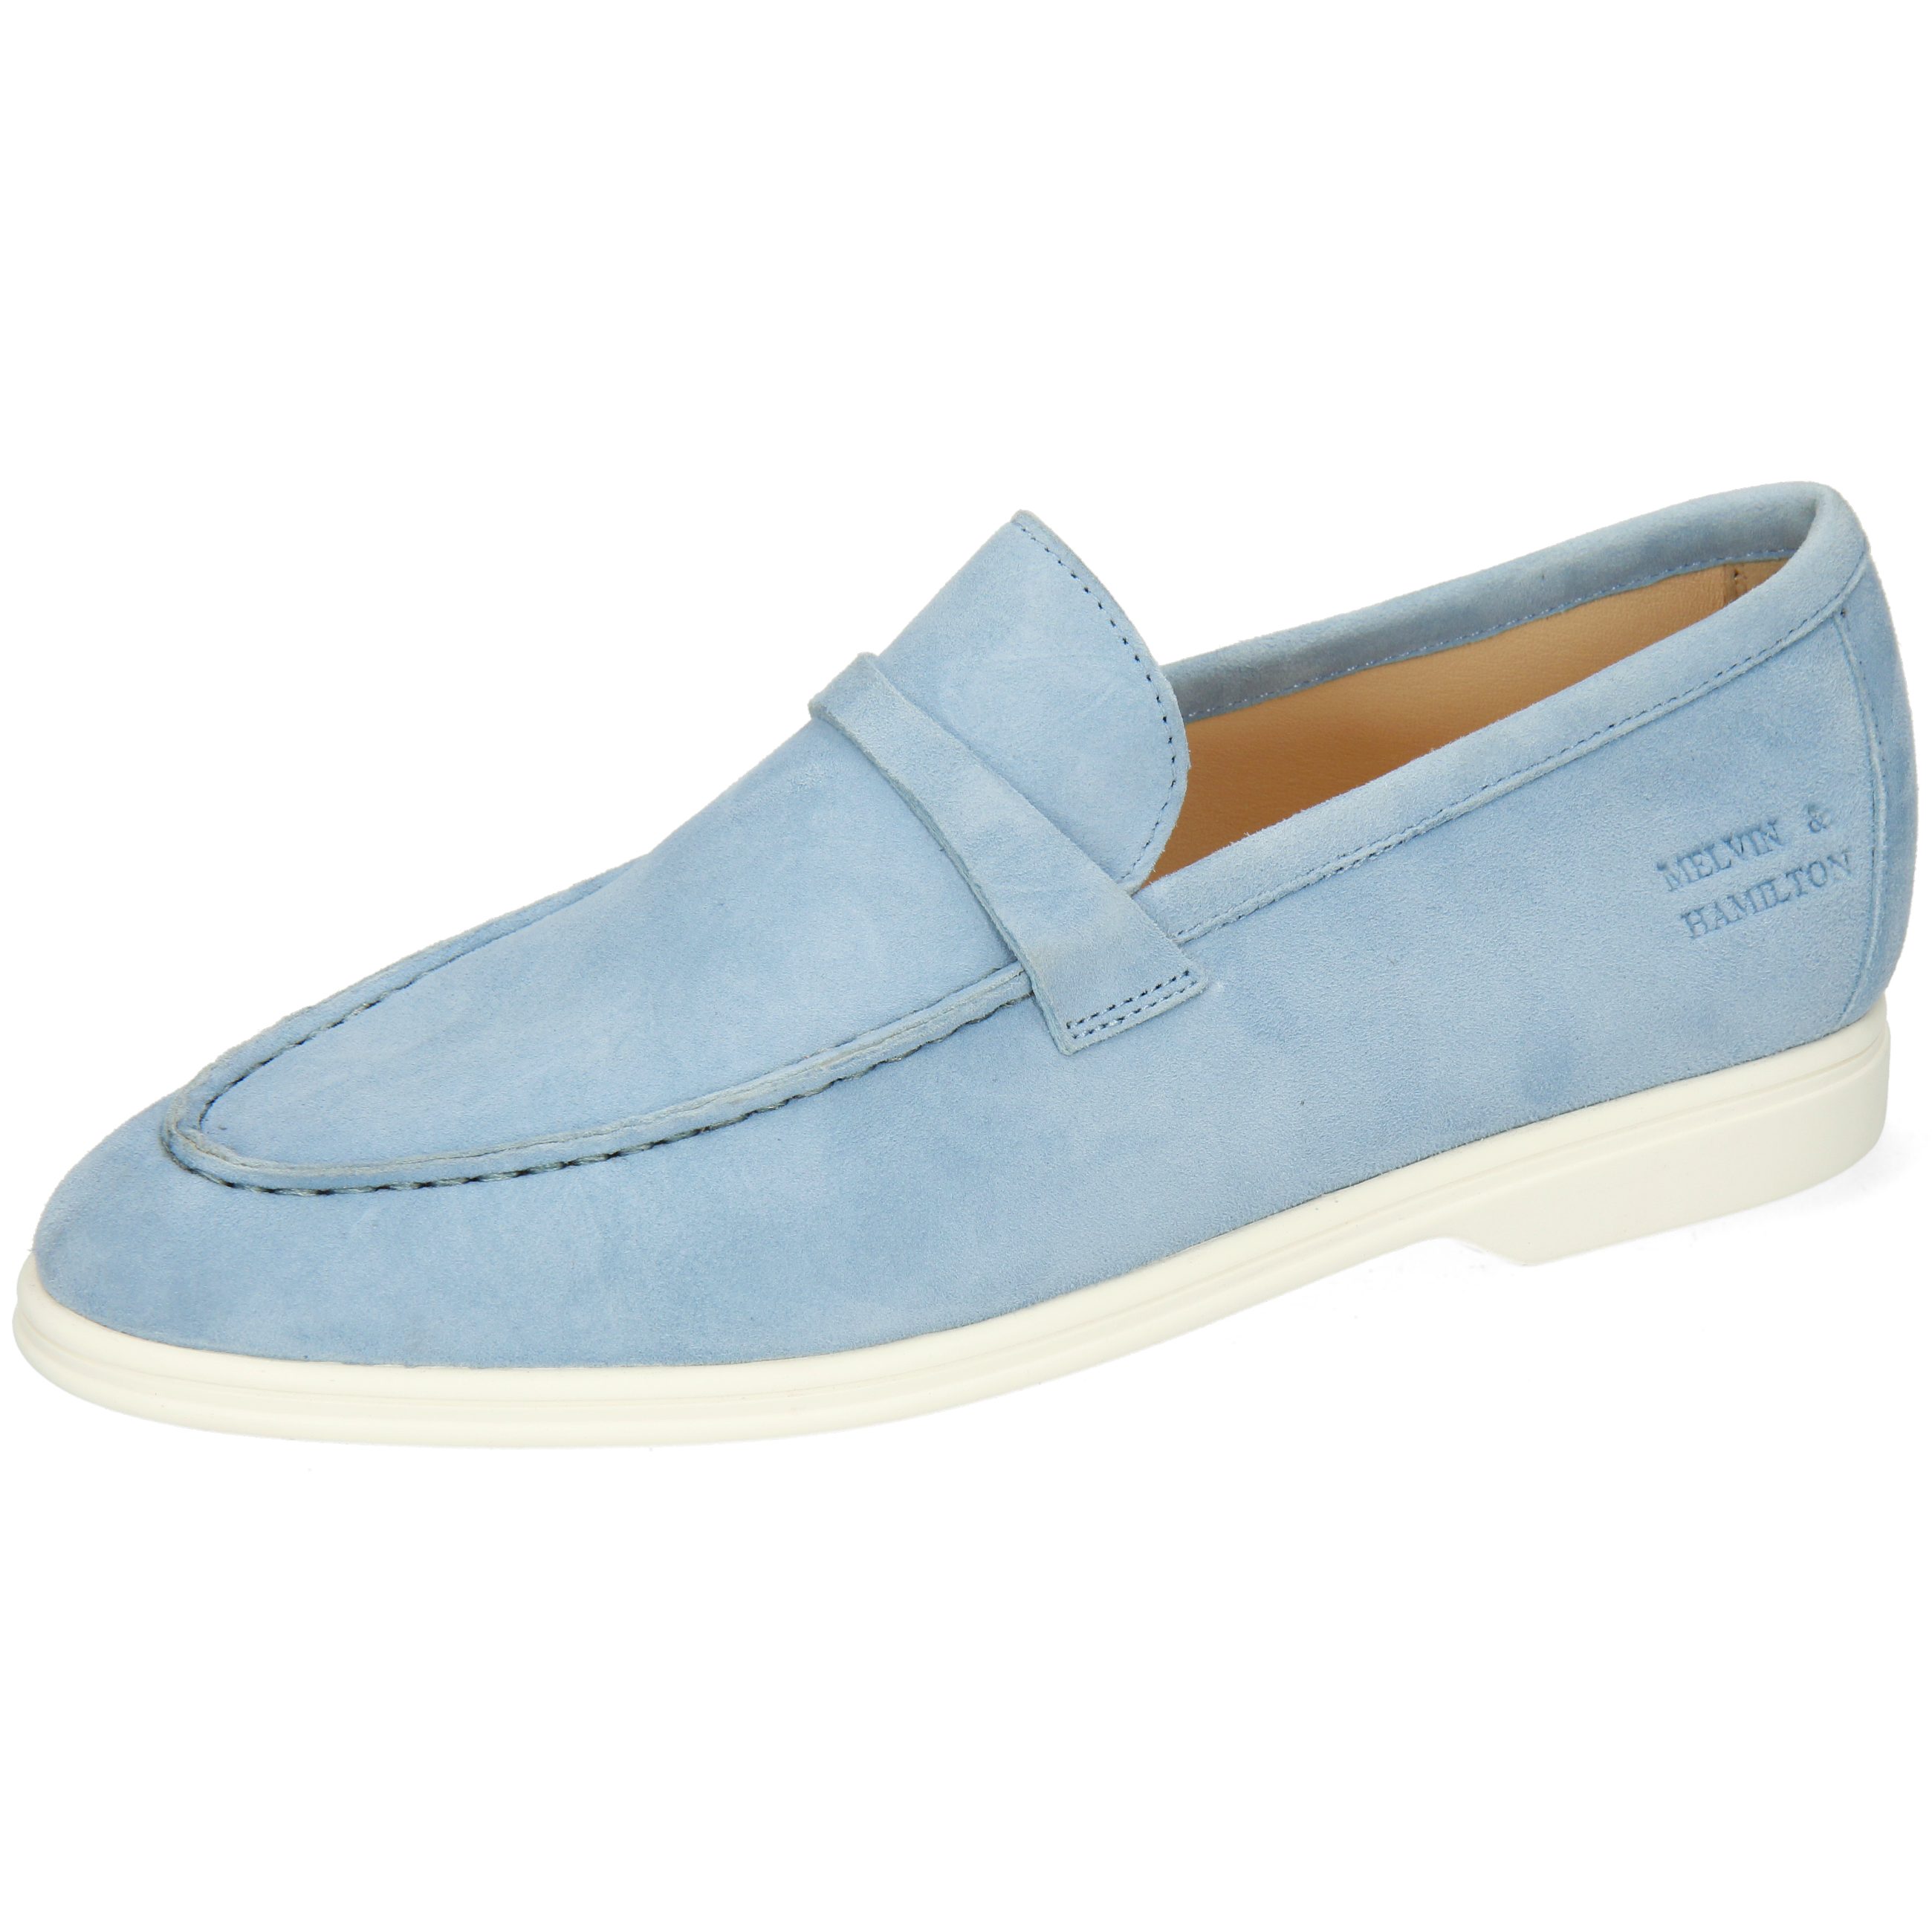 Melvin & Hamilton Adley 3 Loafer Goat Suede Sky Accessory